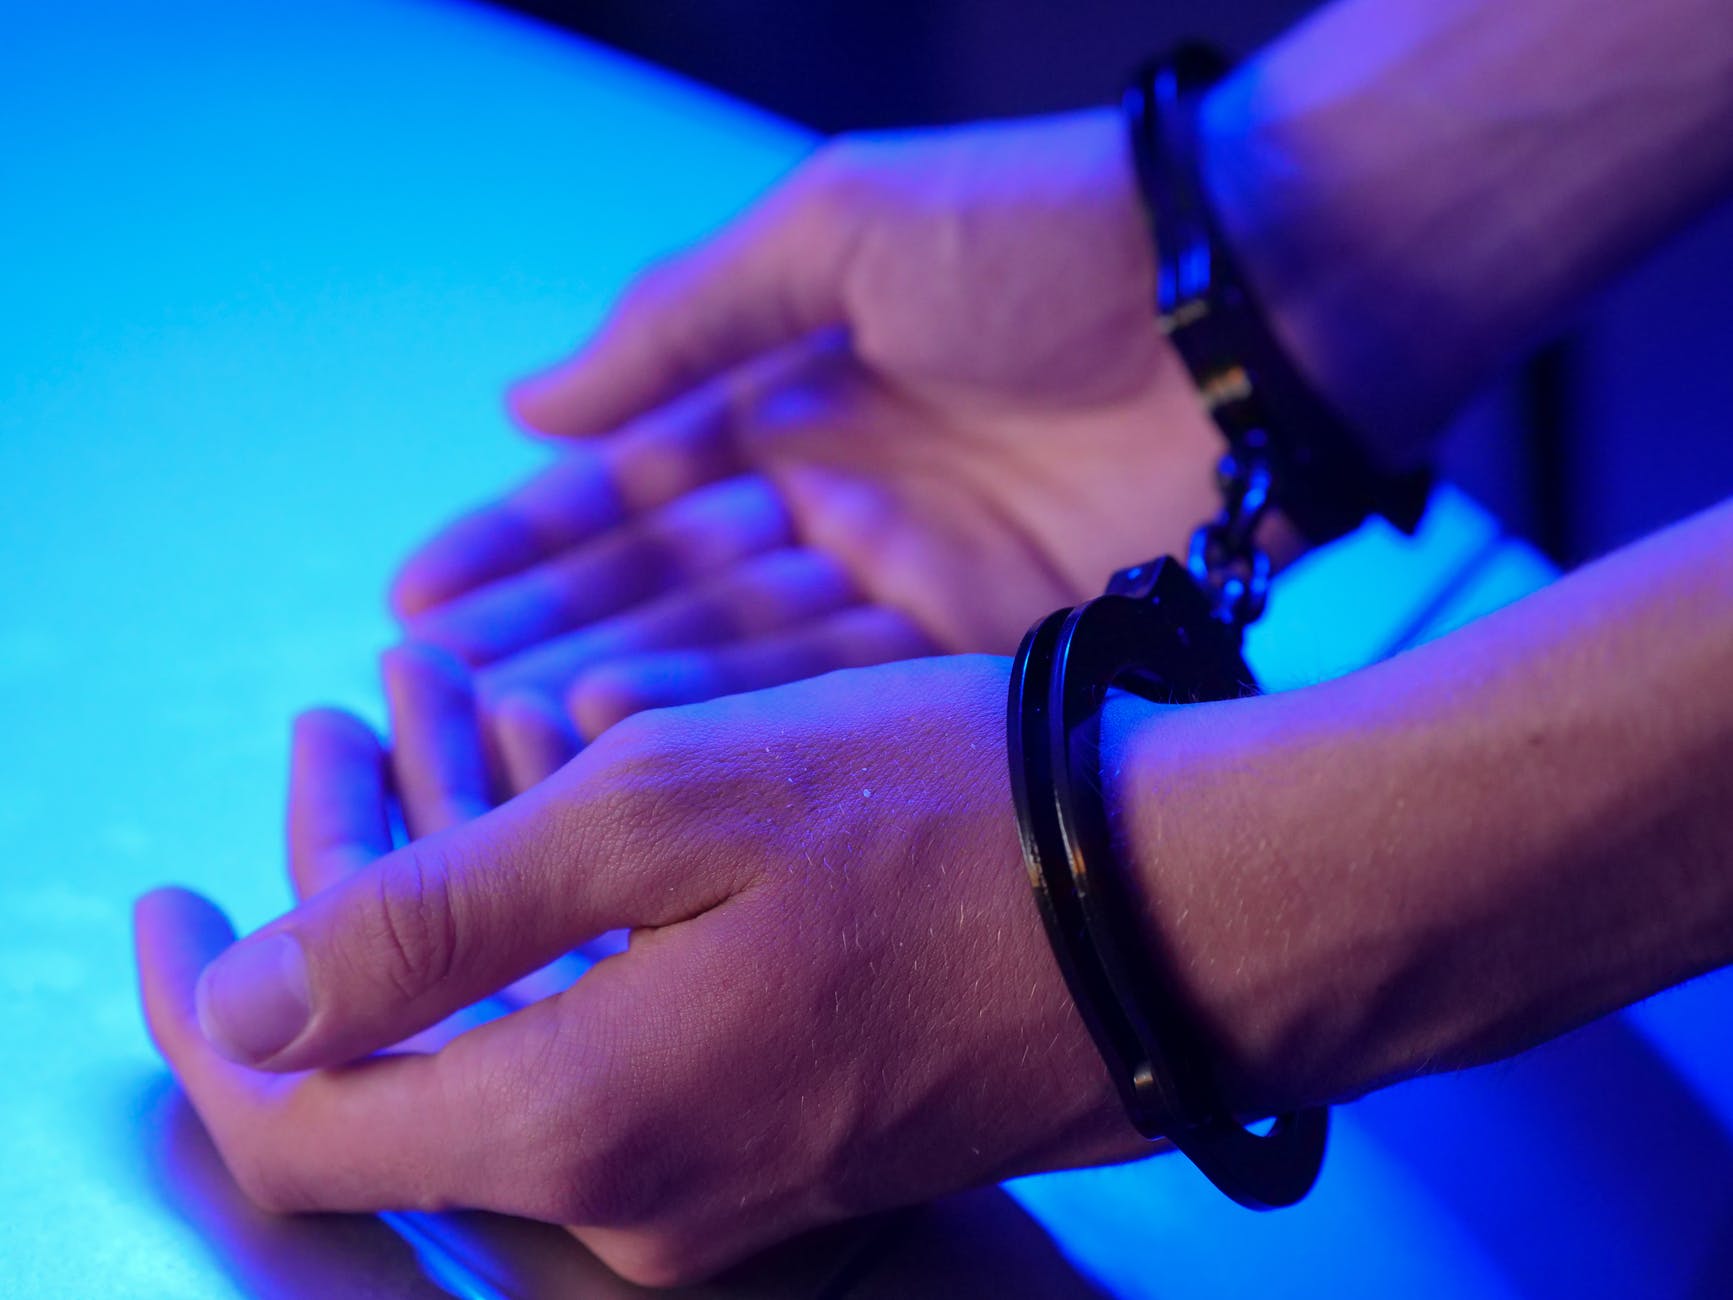 person wearing metal handcuffs